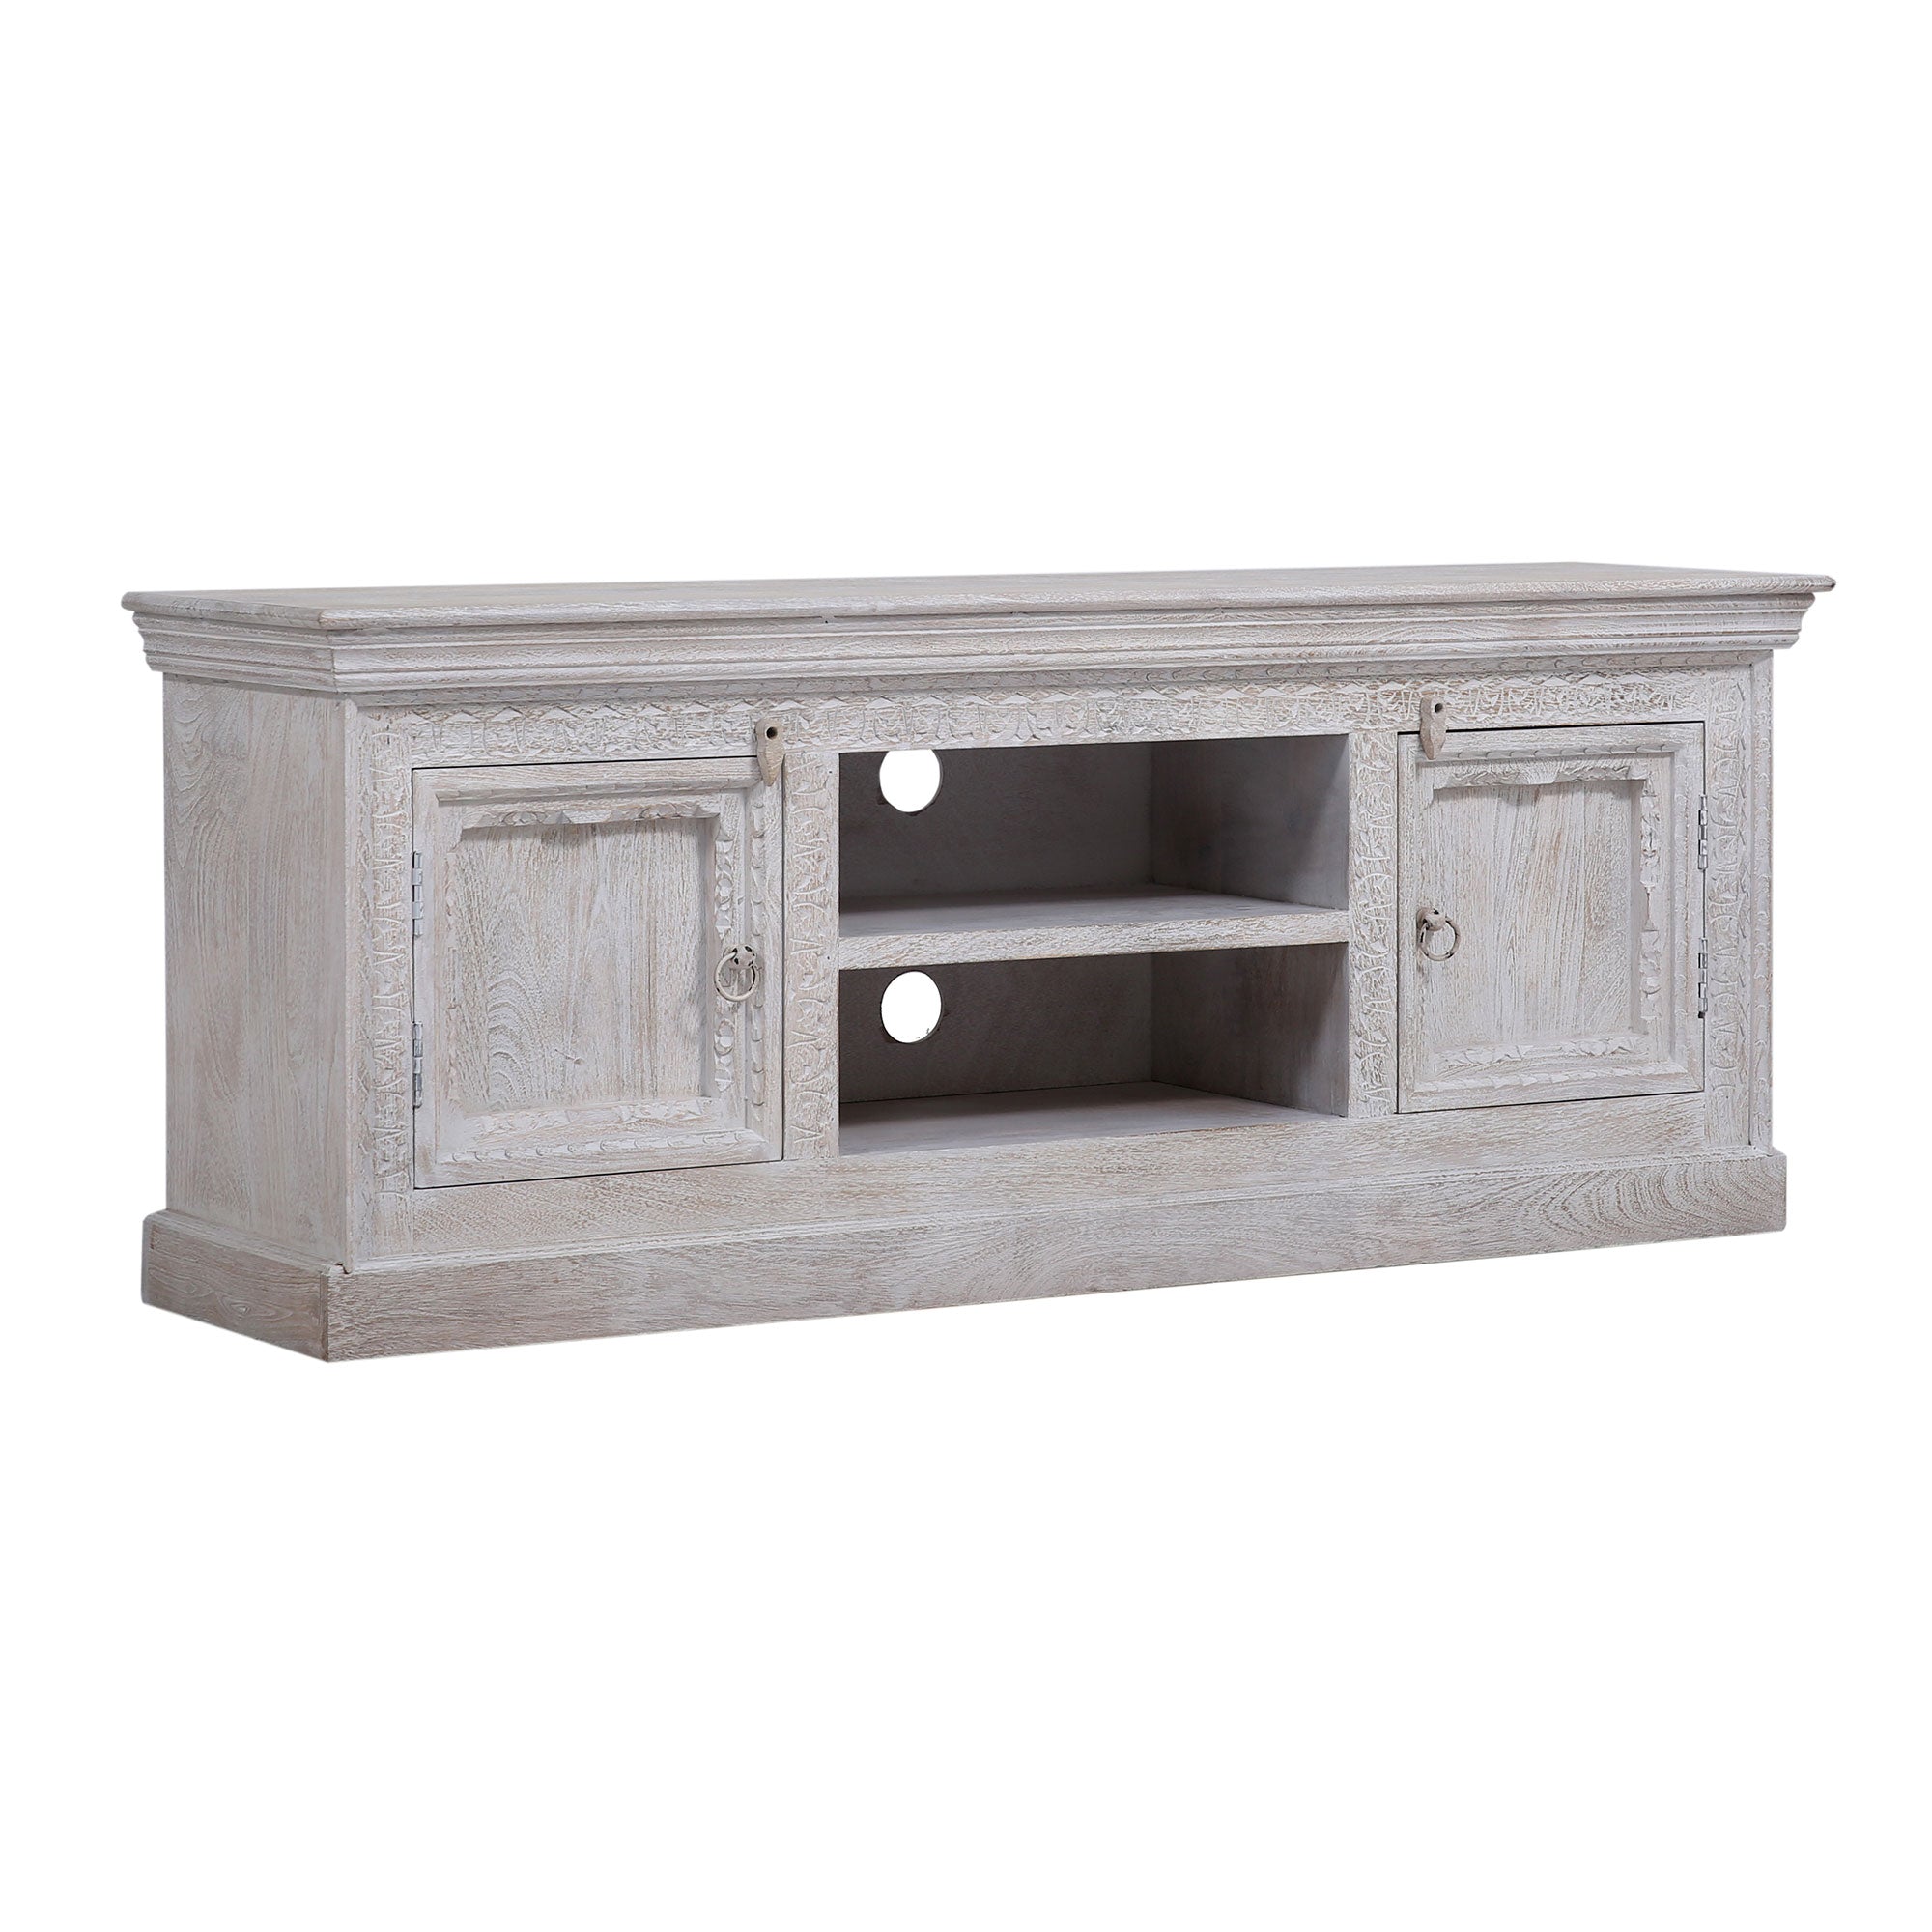 Mahala Nomad Wooden Media Unit in Distressed White Finish in Media Units by VMInnovations